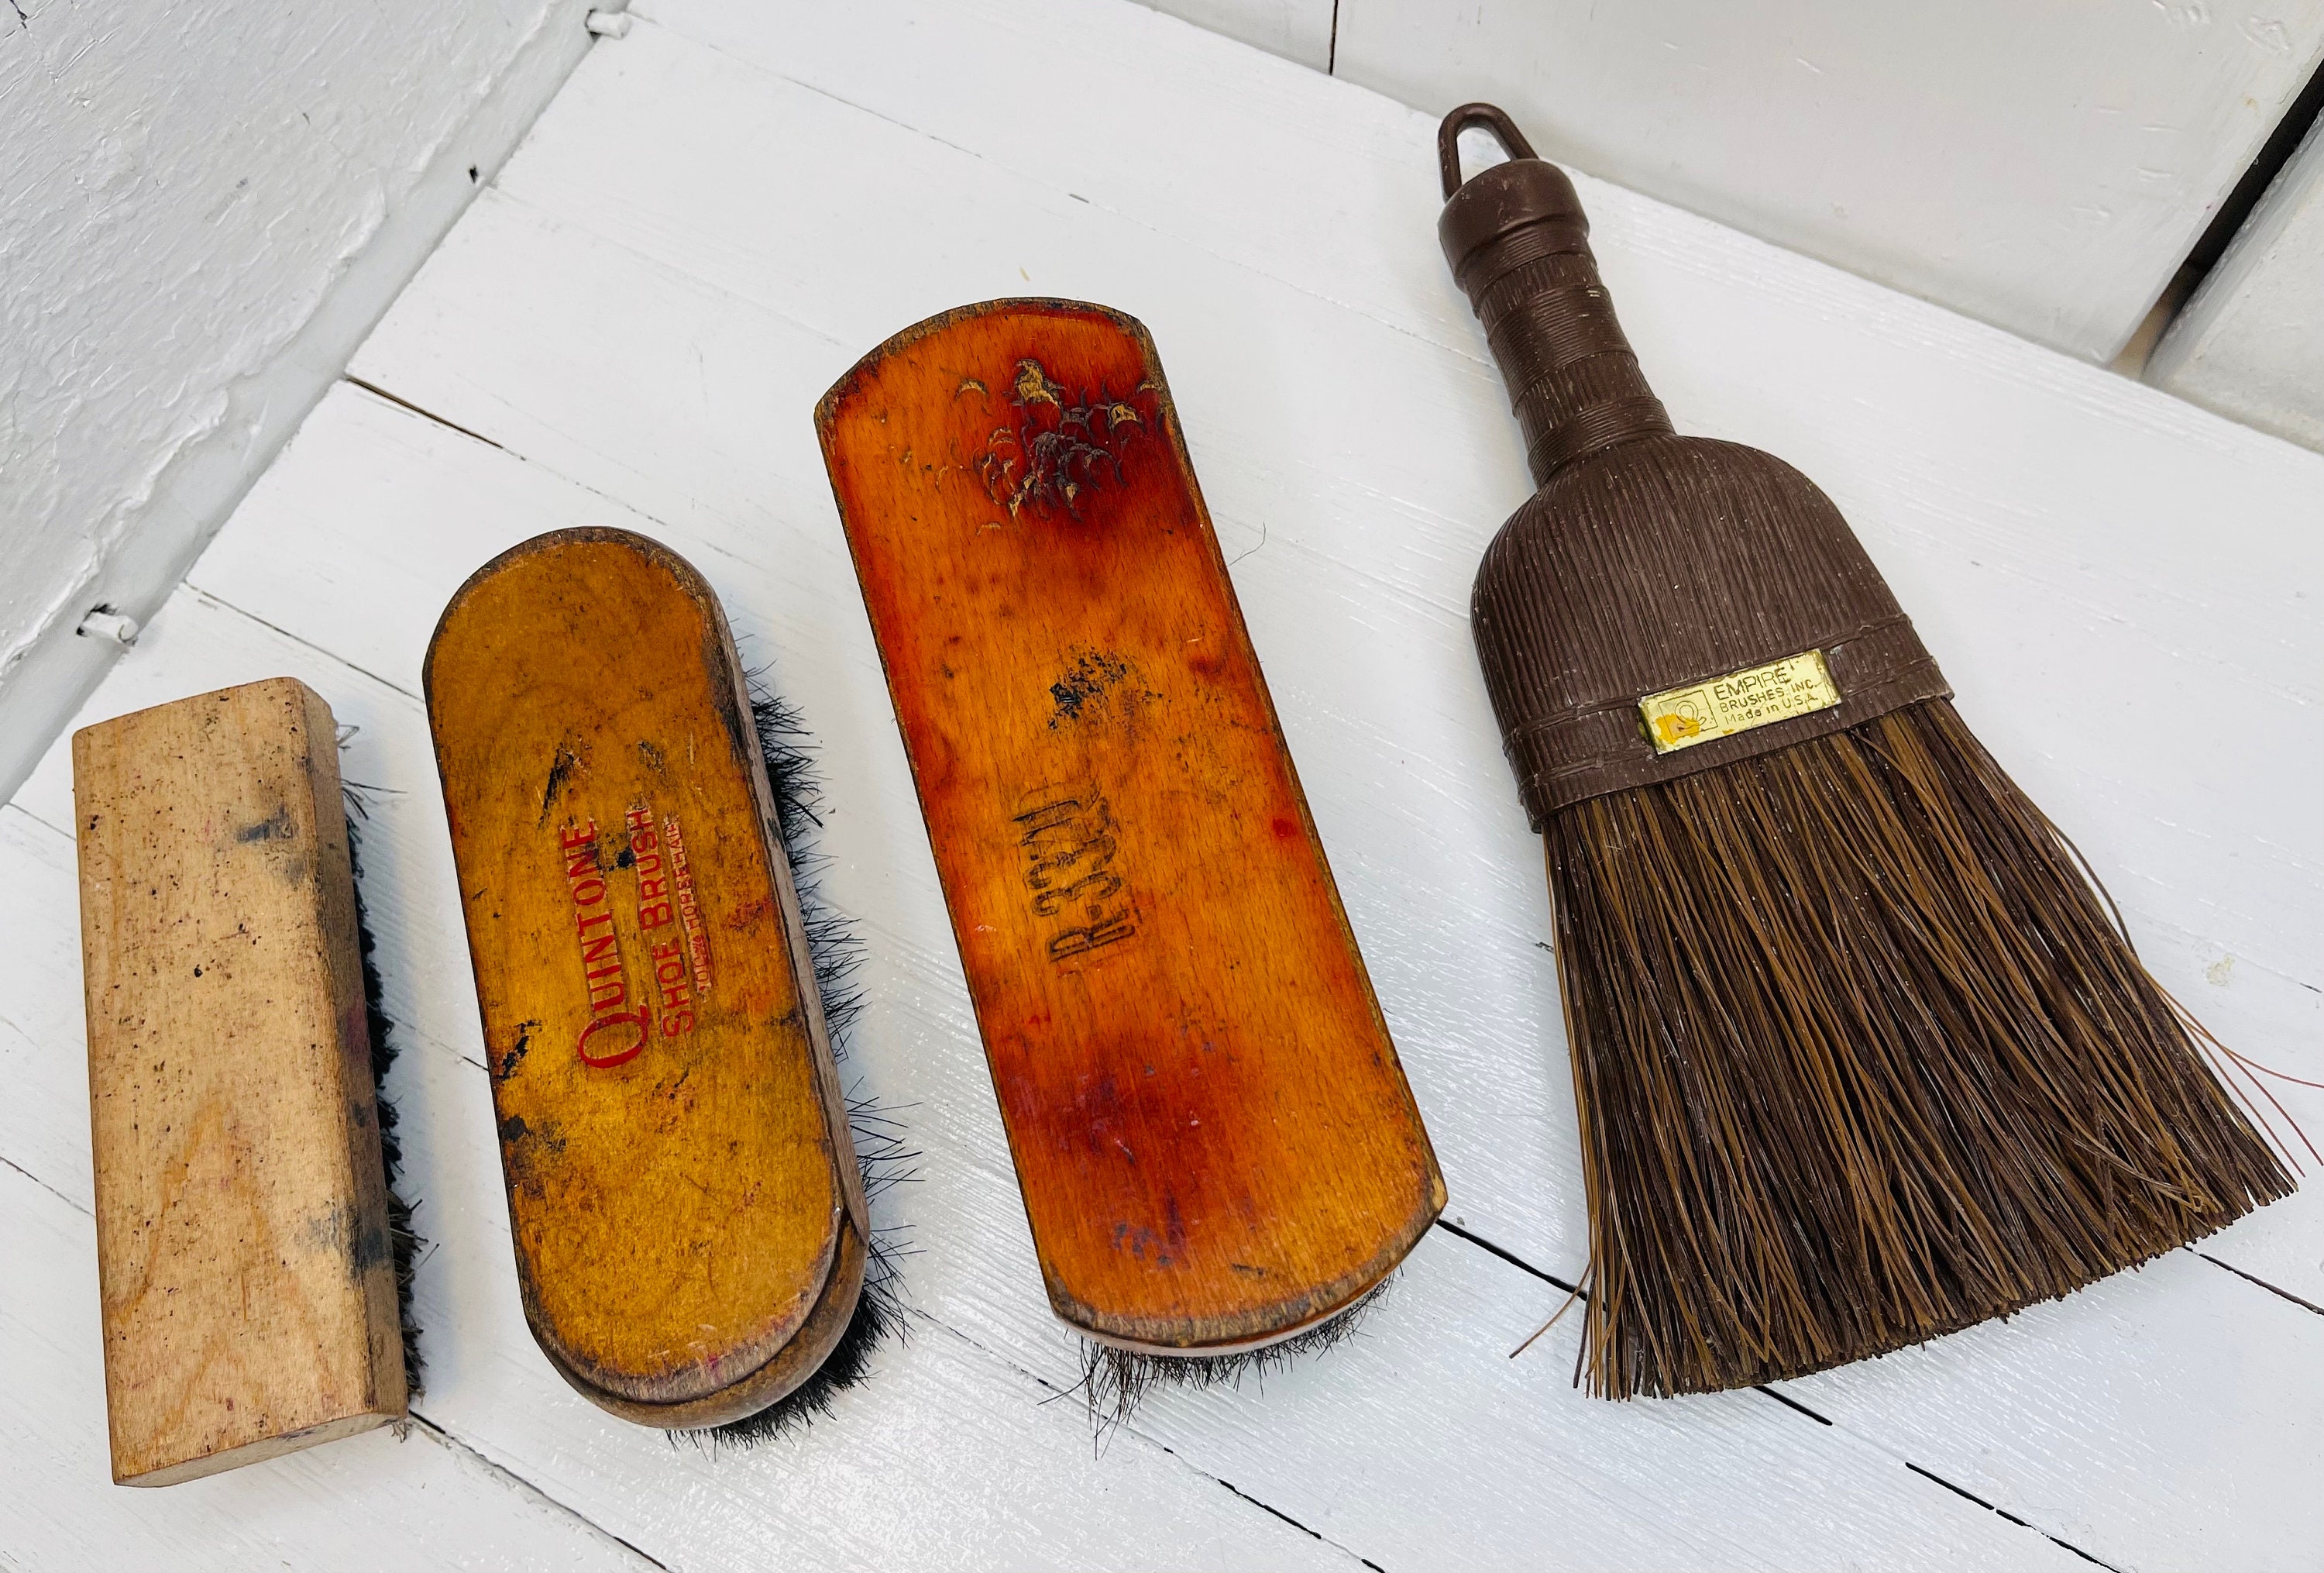 Vintage Kiwi Horse Hair Brushes for Clothes and Shoes Rustic Farmhouse  Decor Primitive Decor Old Wood Brush Cobbler Supplies Utility Brush 